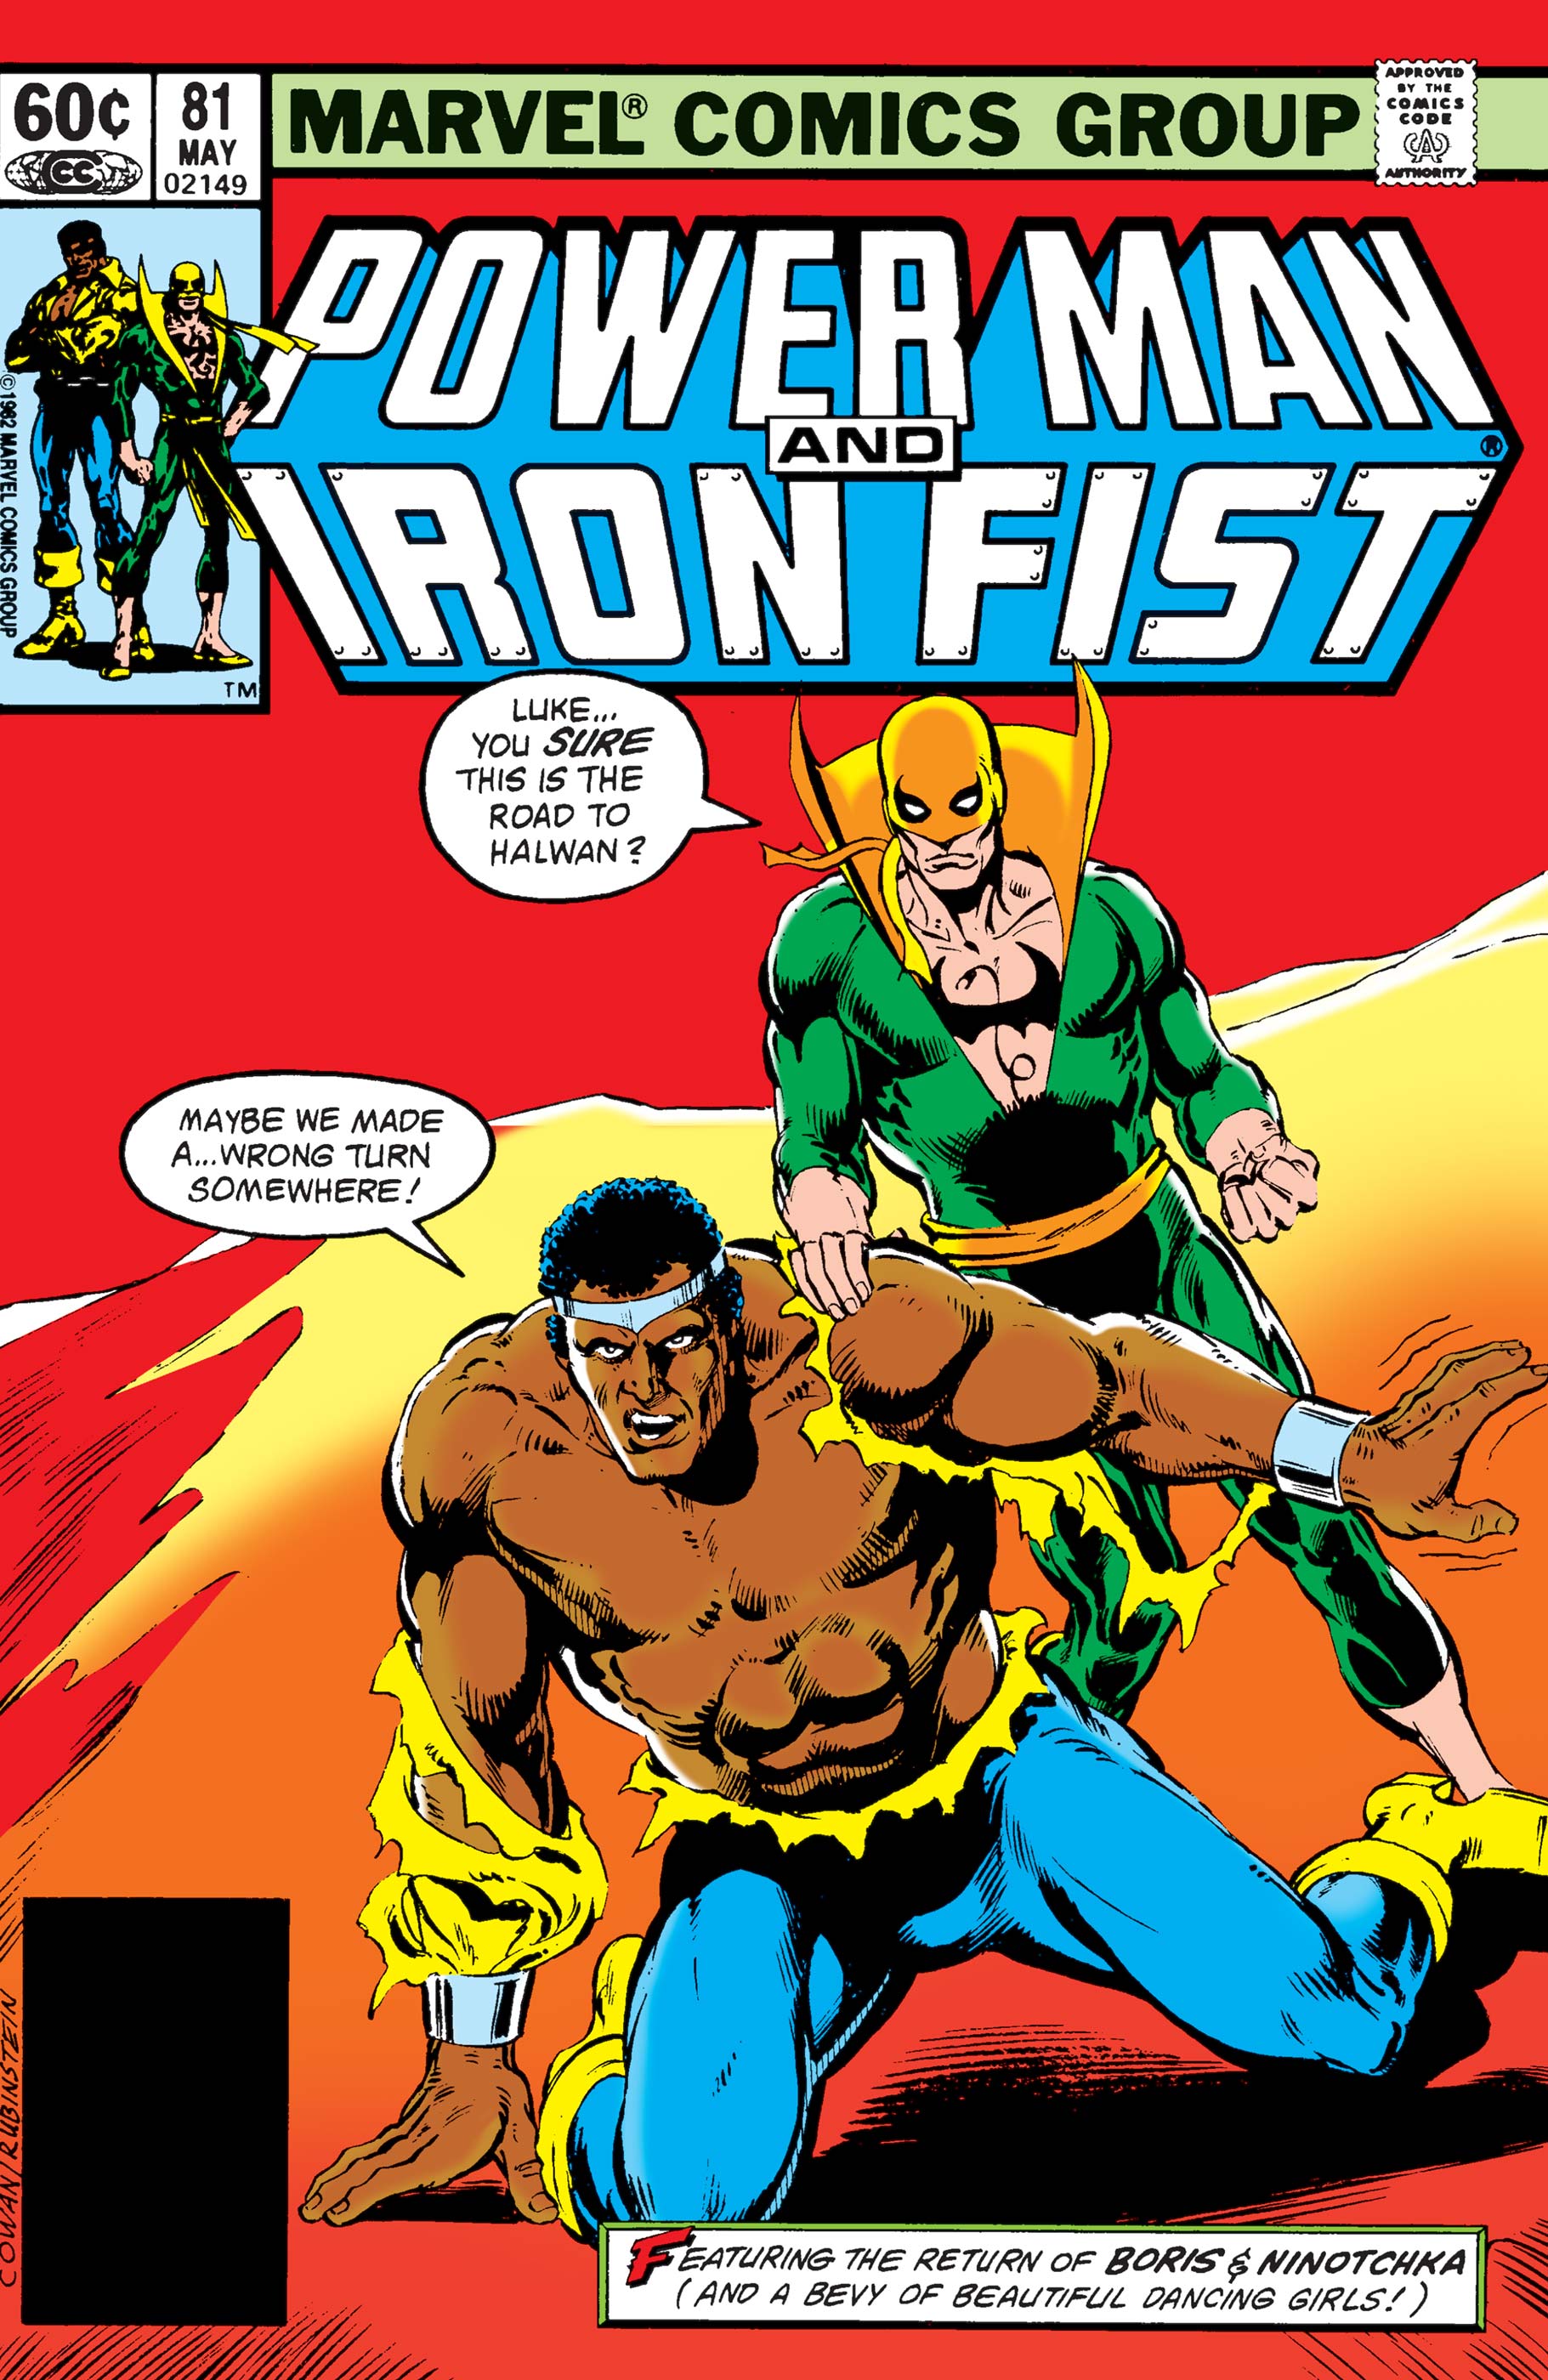 Power Man and Iron Fist (1978) #81